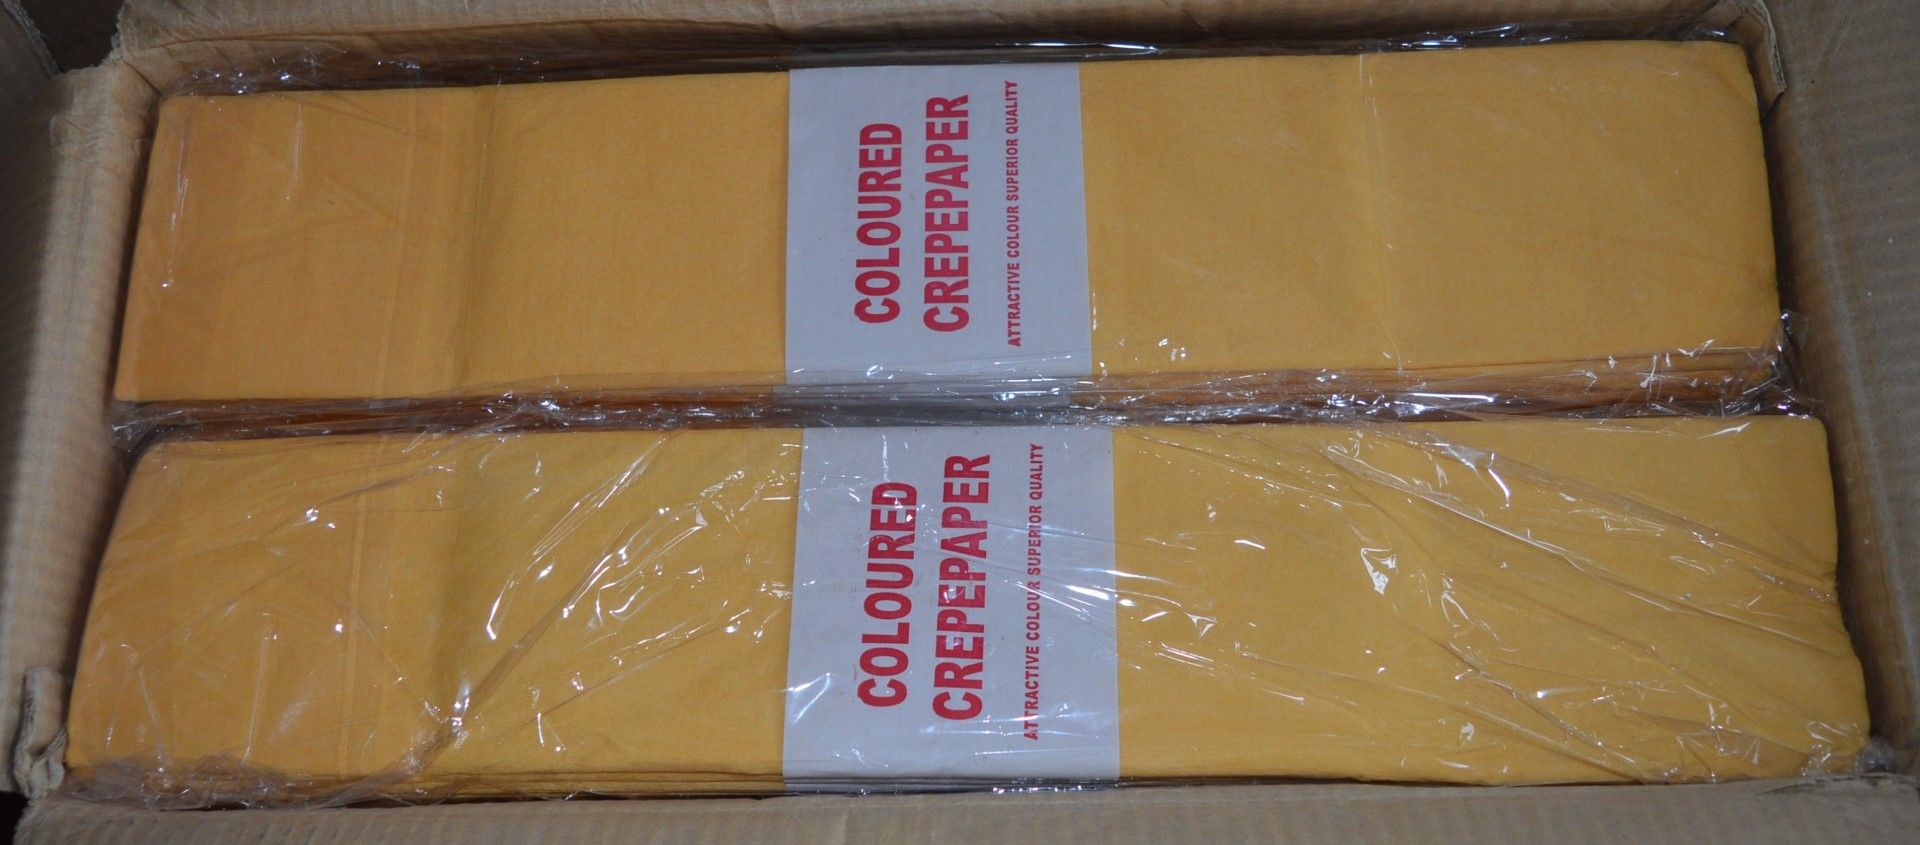 100 x Gold Crepes - Includes 10 Packs of 10 - Brand New Stock - CL185 - Ref DRT0266 - Location: